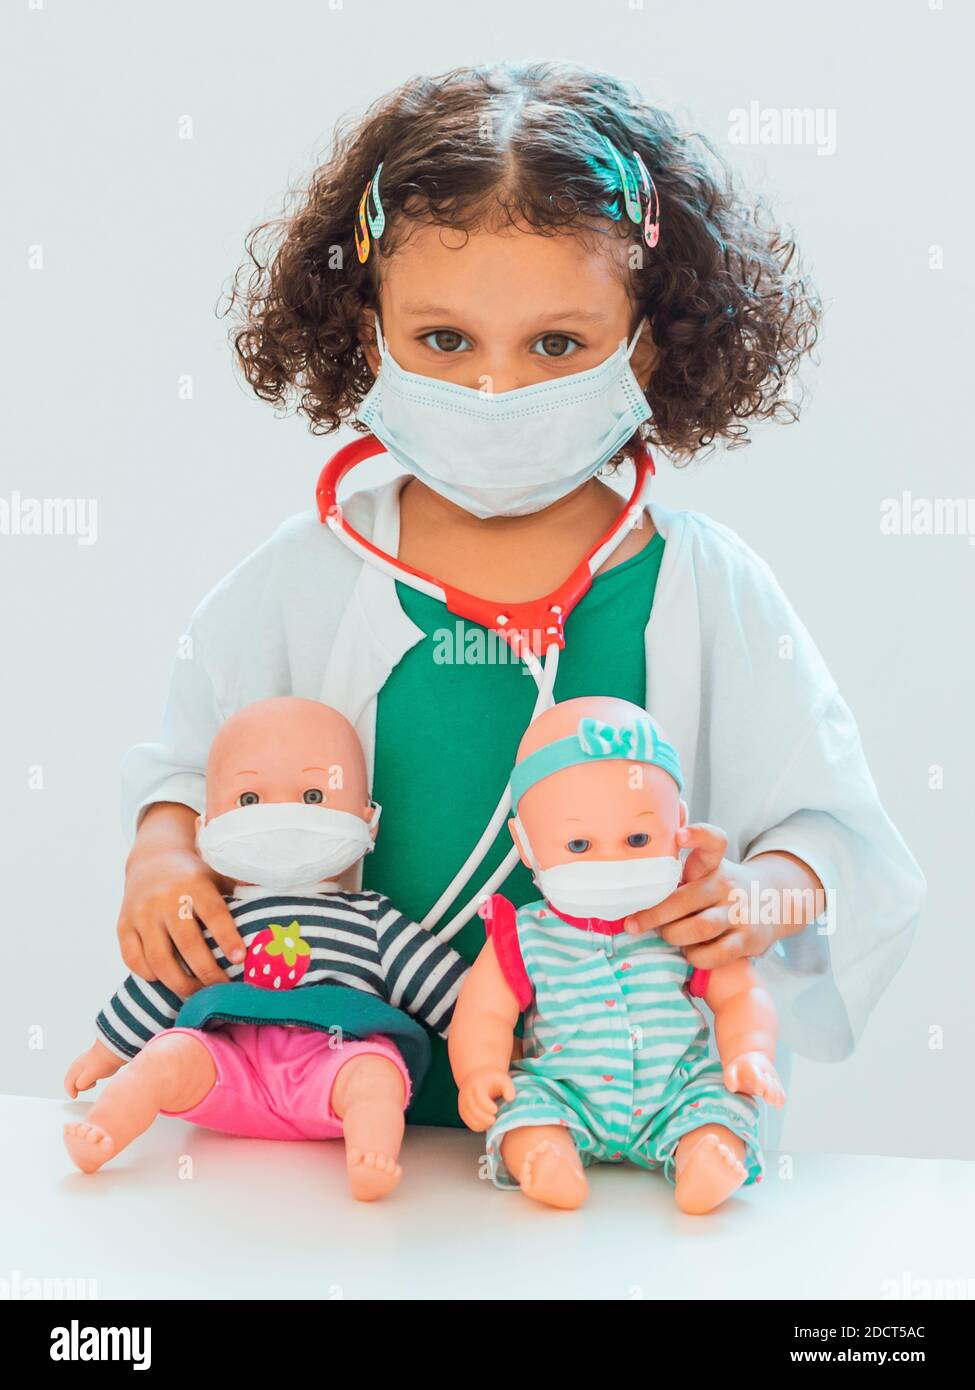 A girl who plays doctor with two baby dolls as a patient, they all wear protective masks Stock Photo